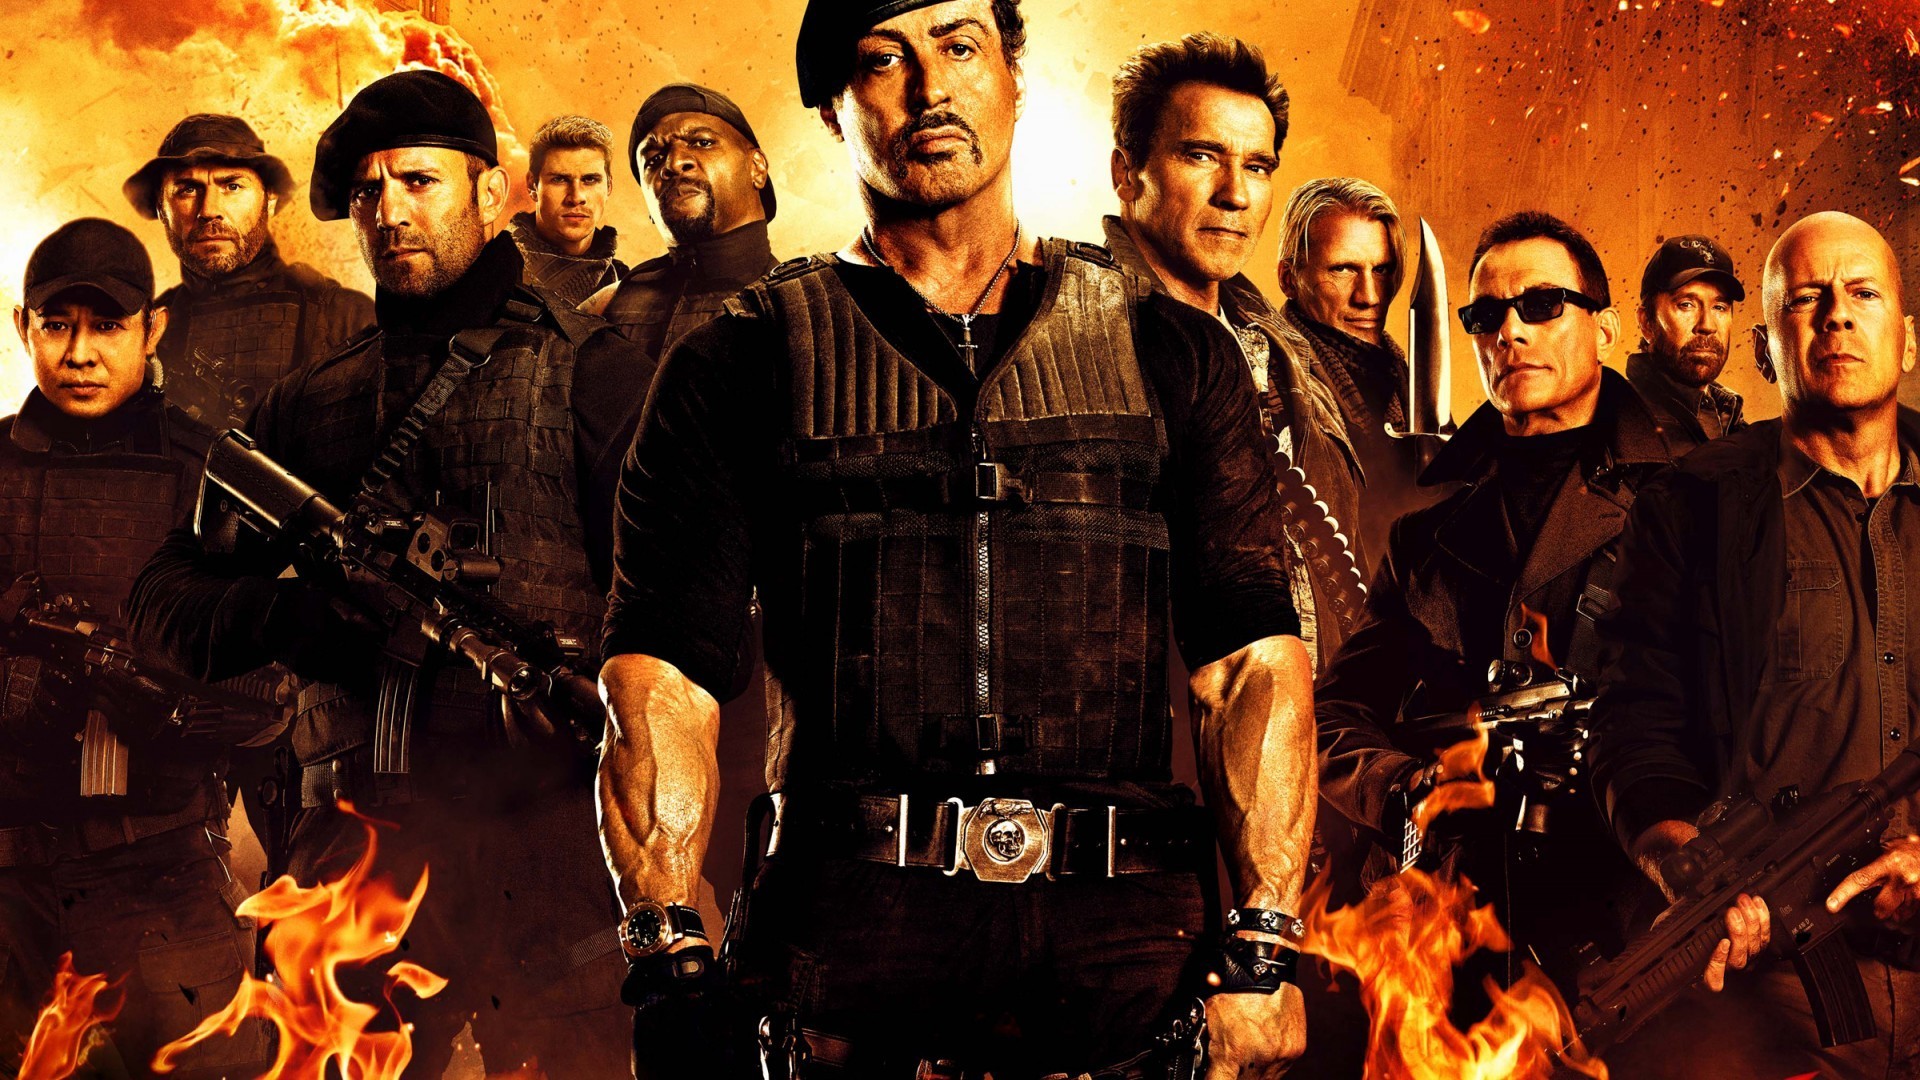 People 1920x1080 movies Sylvester Stallone Bruce Willis Arnold Schwarzenegger Jason Statham The Expendables 2 movie poster